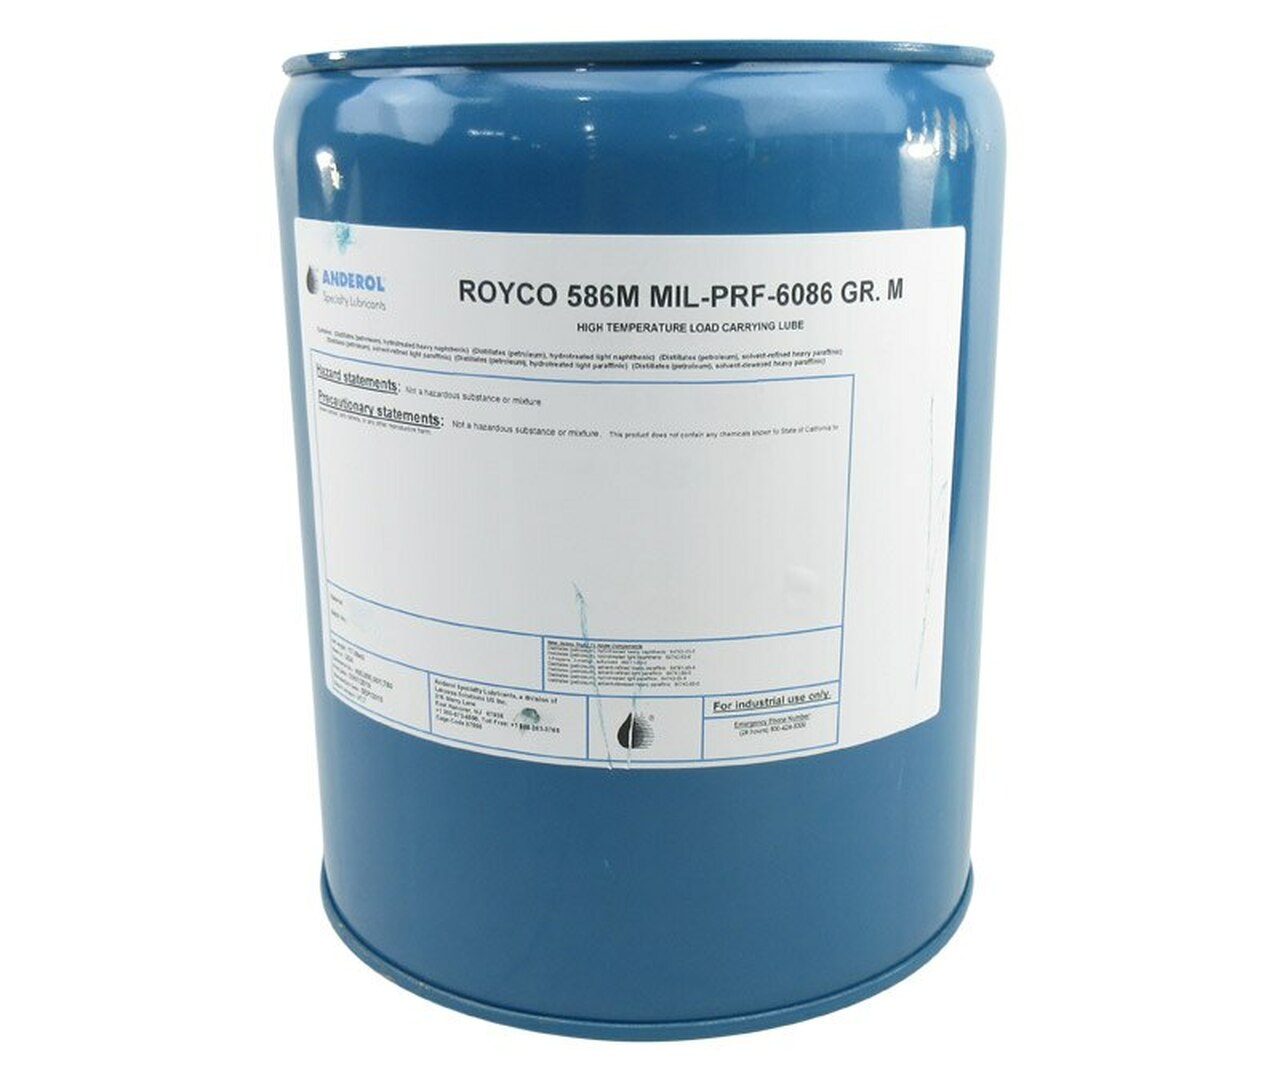  - Royco 586L Mineral Based Gear Lubricating Oil - 5 Gallon